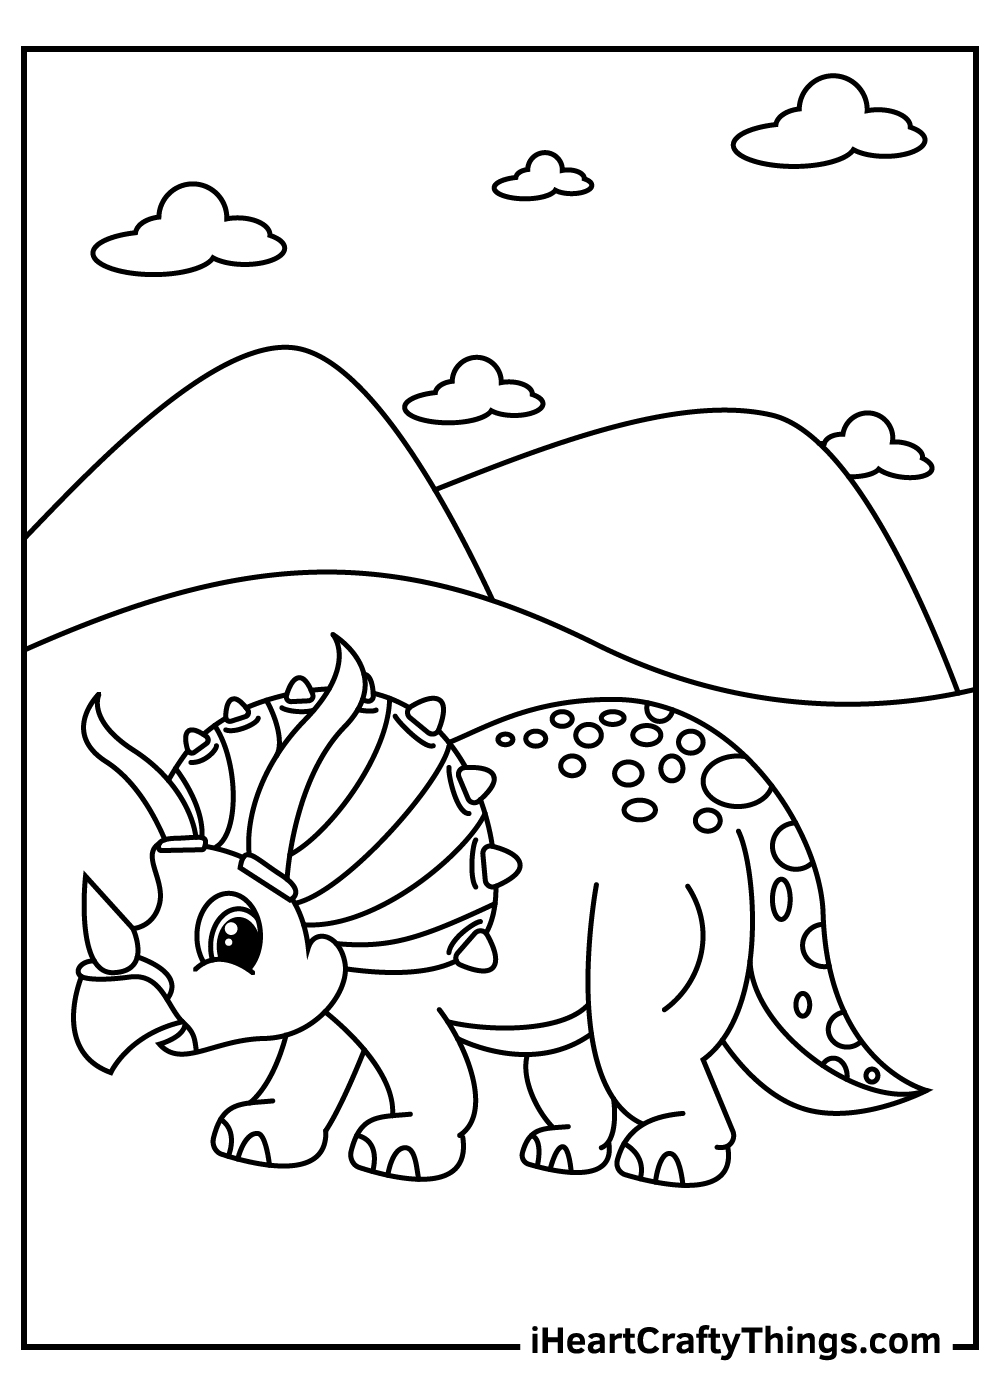 Triceratops coloring pages free printables